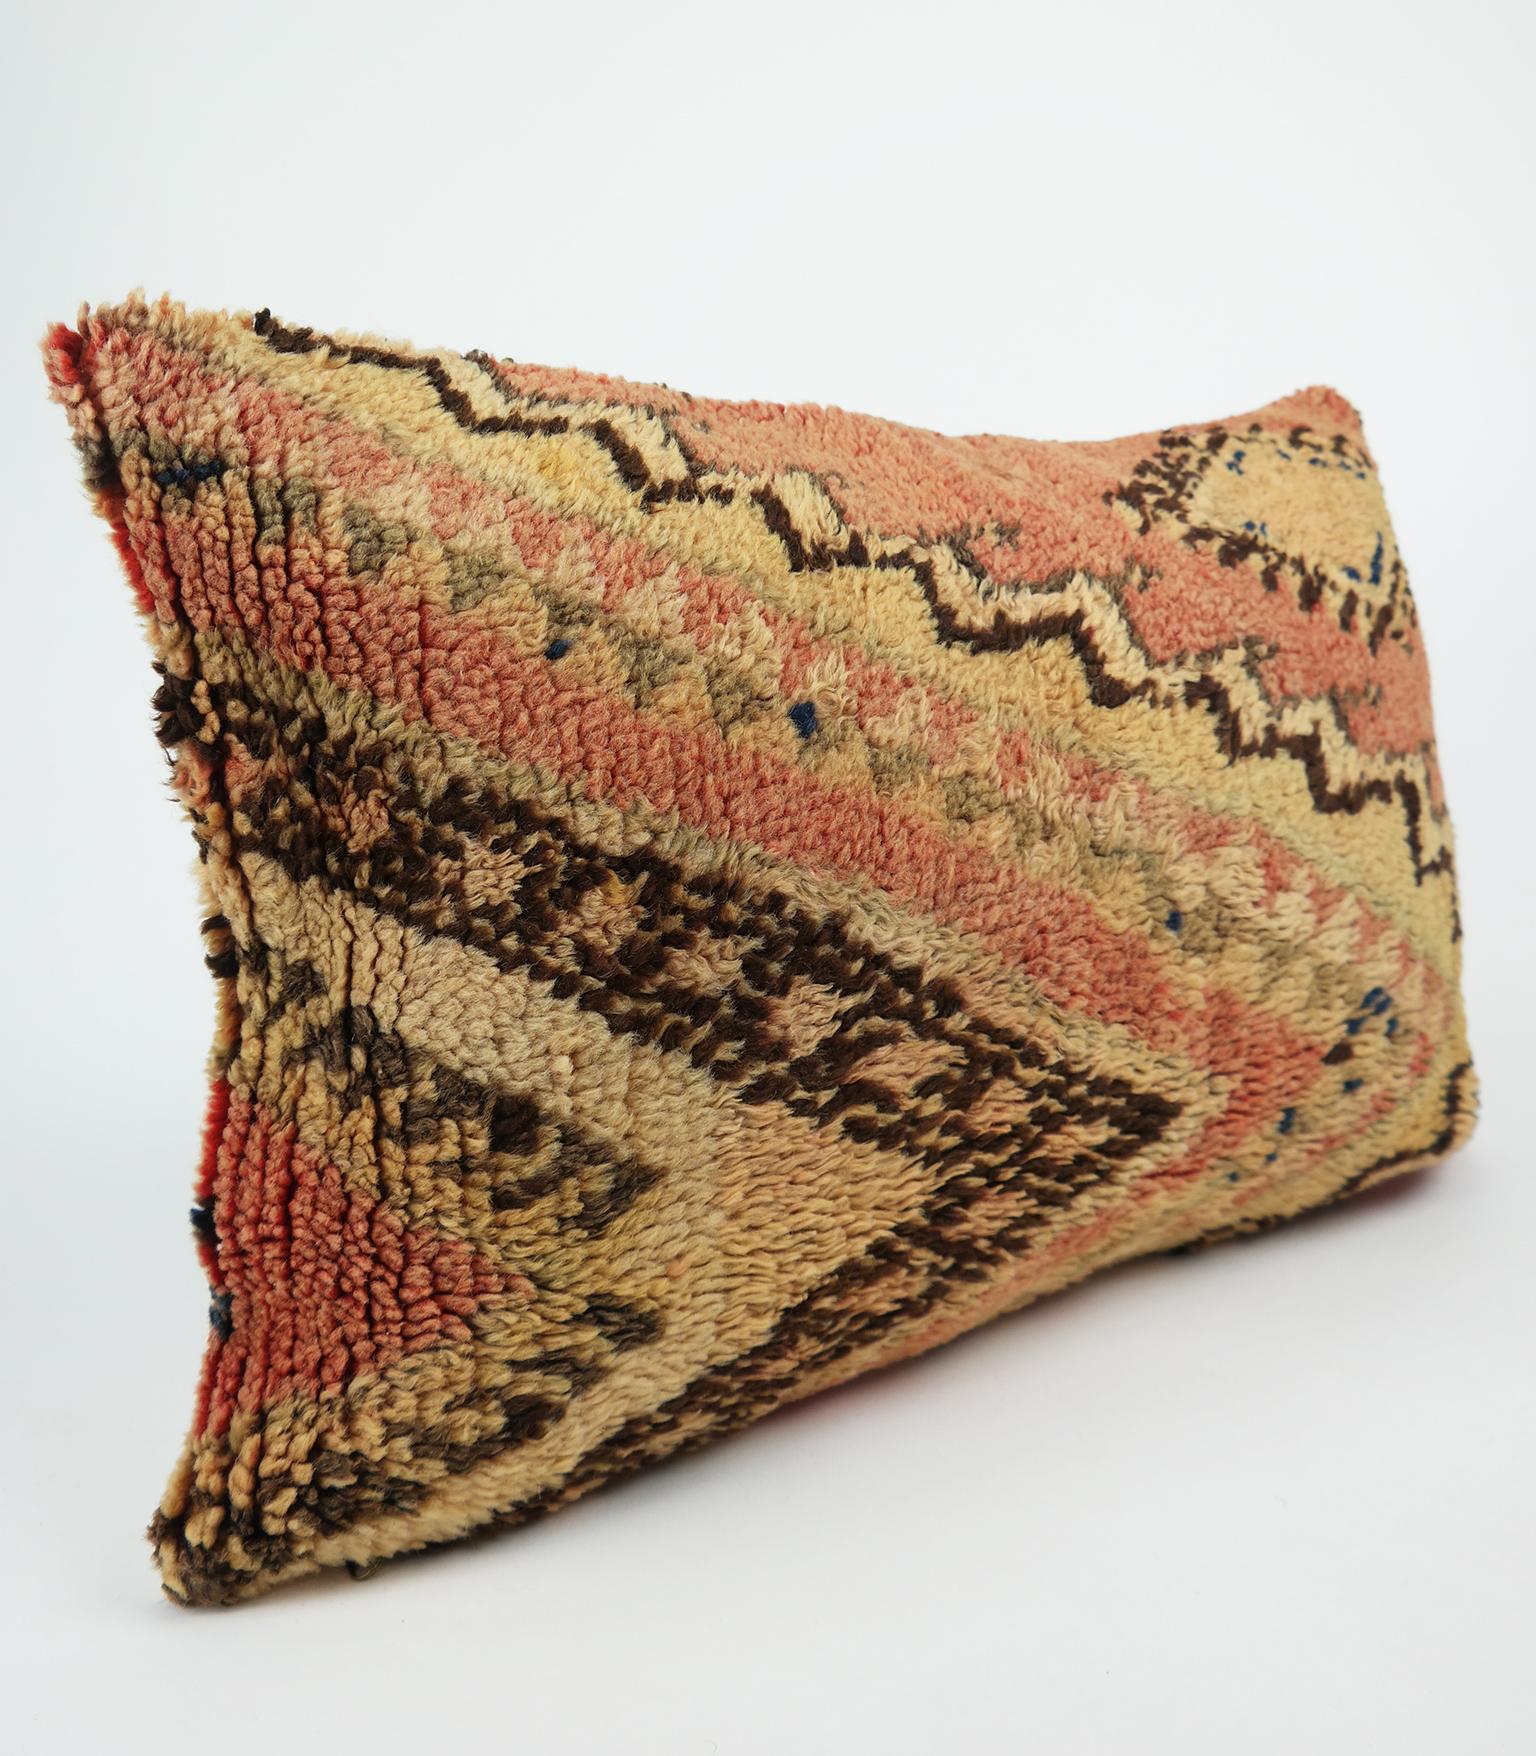 Cushion custom-made from a more than 40 years old Moroccan rug, searched and selected by ourselves. This pillow is a one-of-a-kind with beautiful warm colors. The beauty of our pillows is that they are timeless and blend in every interior. Or